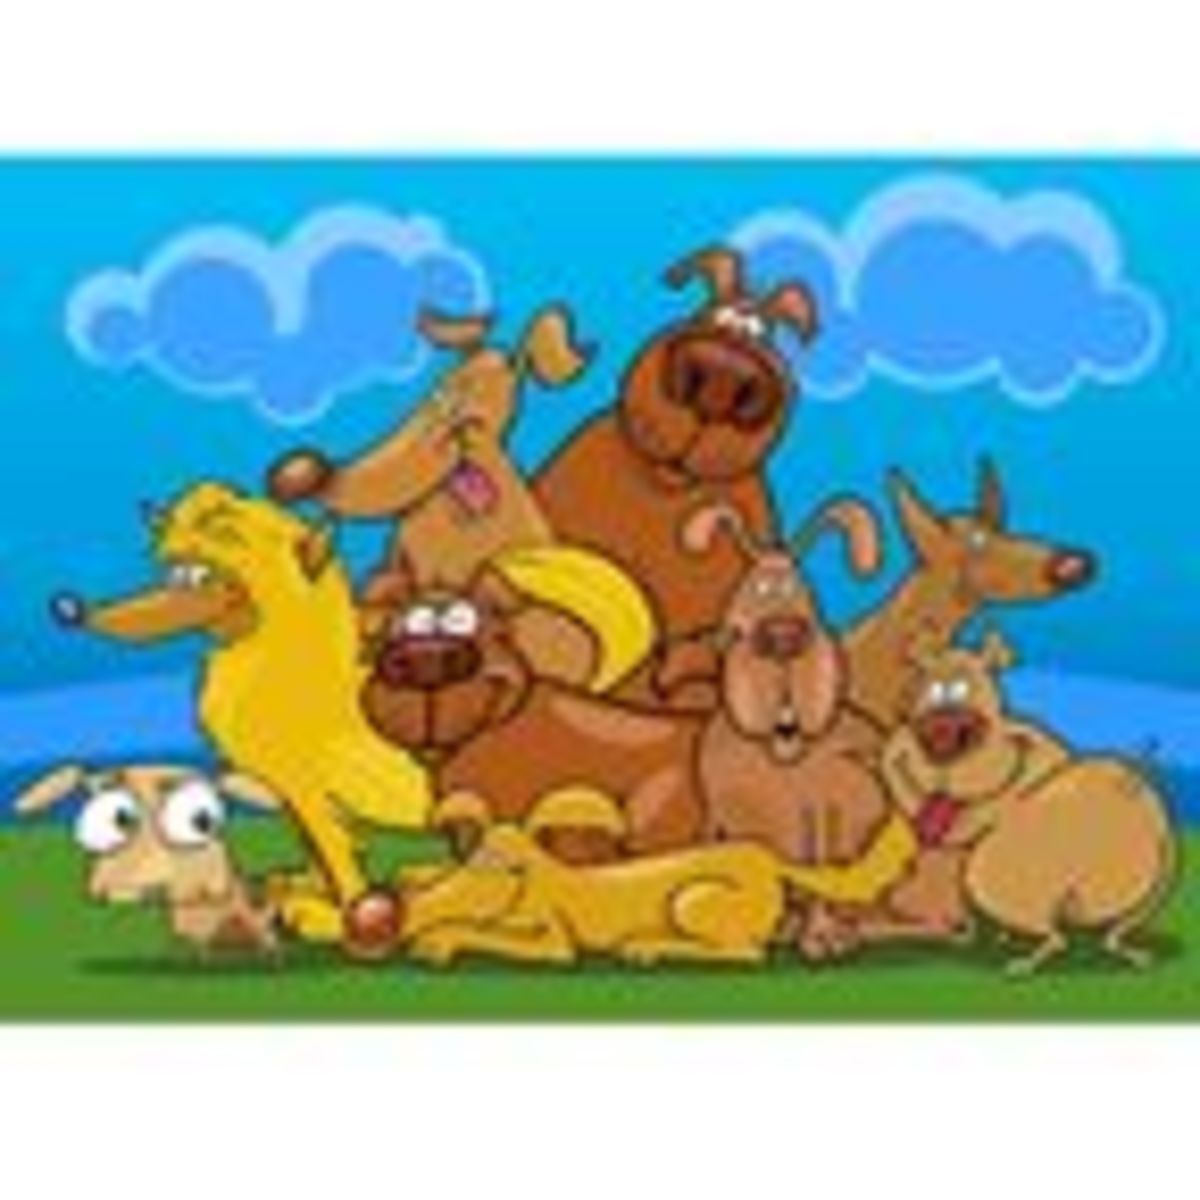 Cartoon Donkey And Dog Sex - Do Purebred and Mixed-Breed Dogs Show Behavior Differences ...